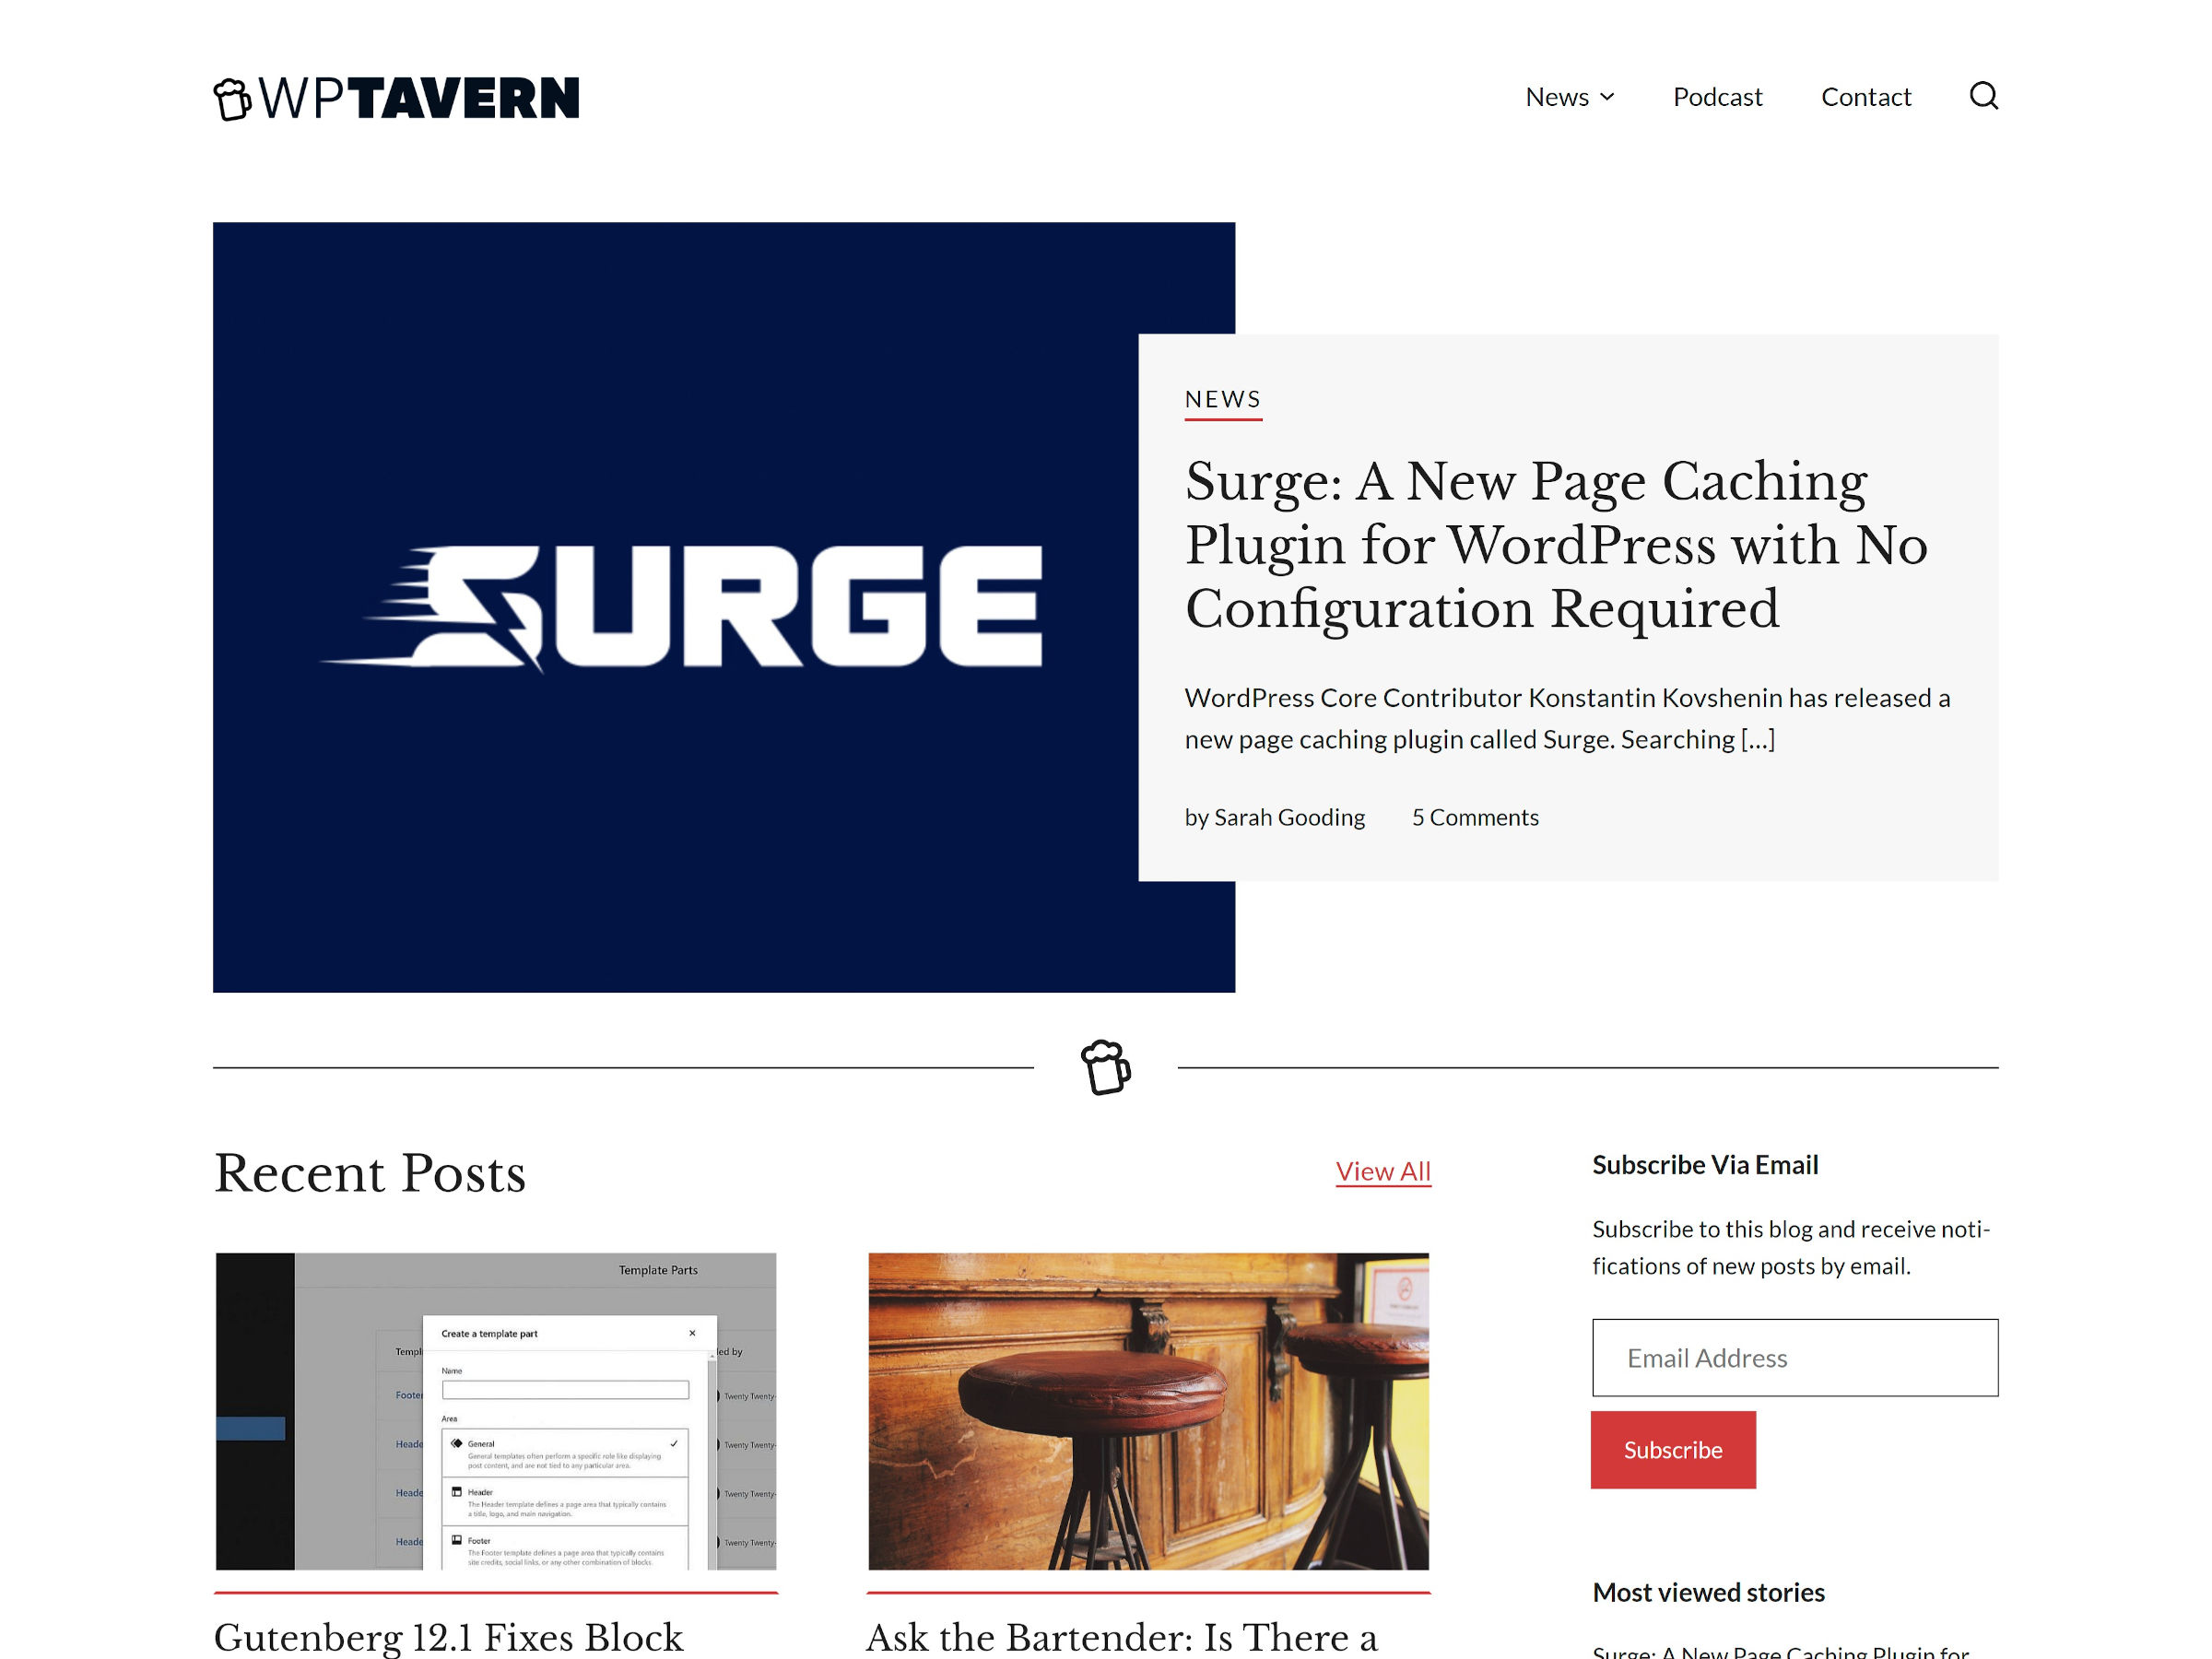 WP Tavern Is Sporting a New Website Design